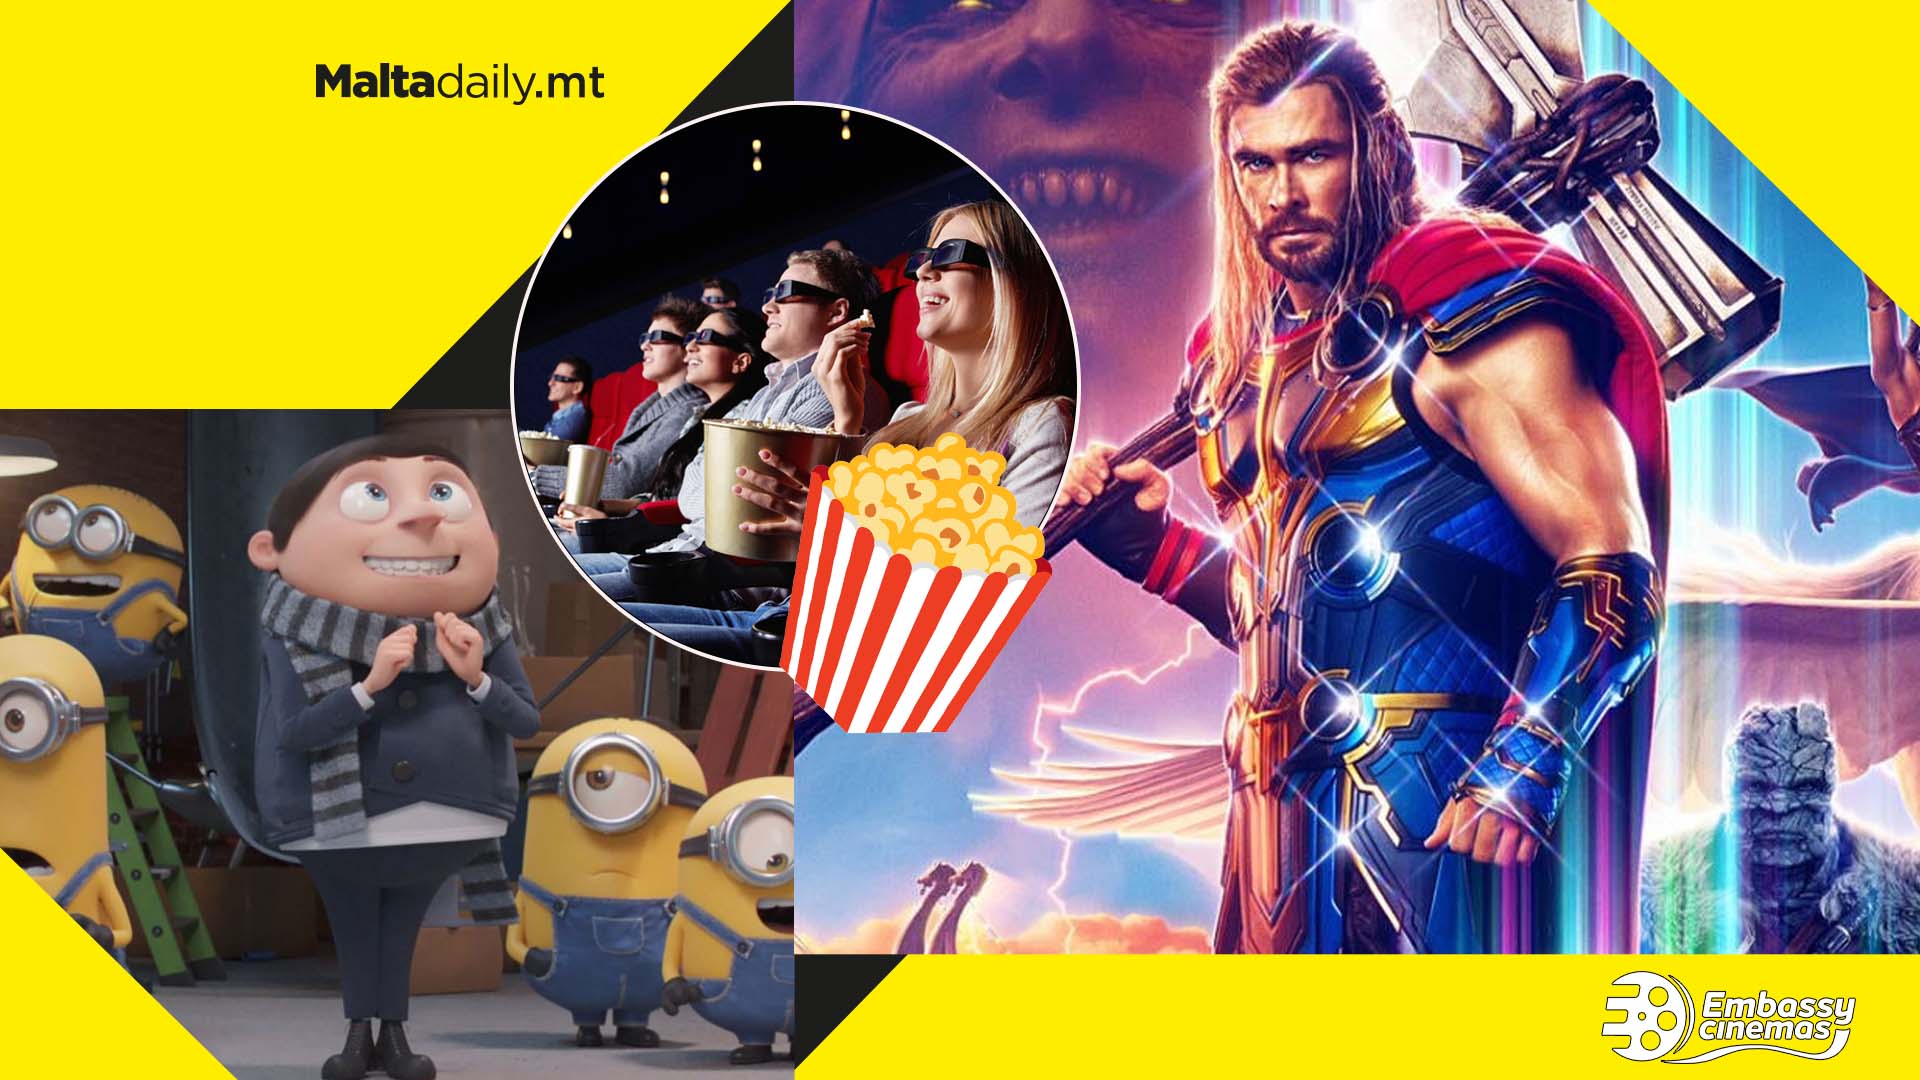 From Thor to Minions: Here's what you can watch at Embassy this month